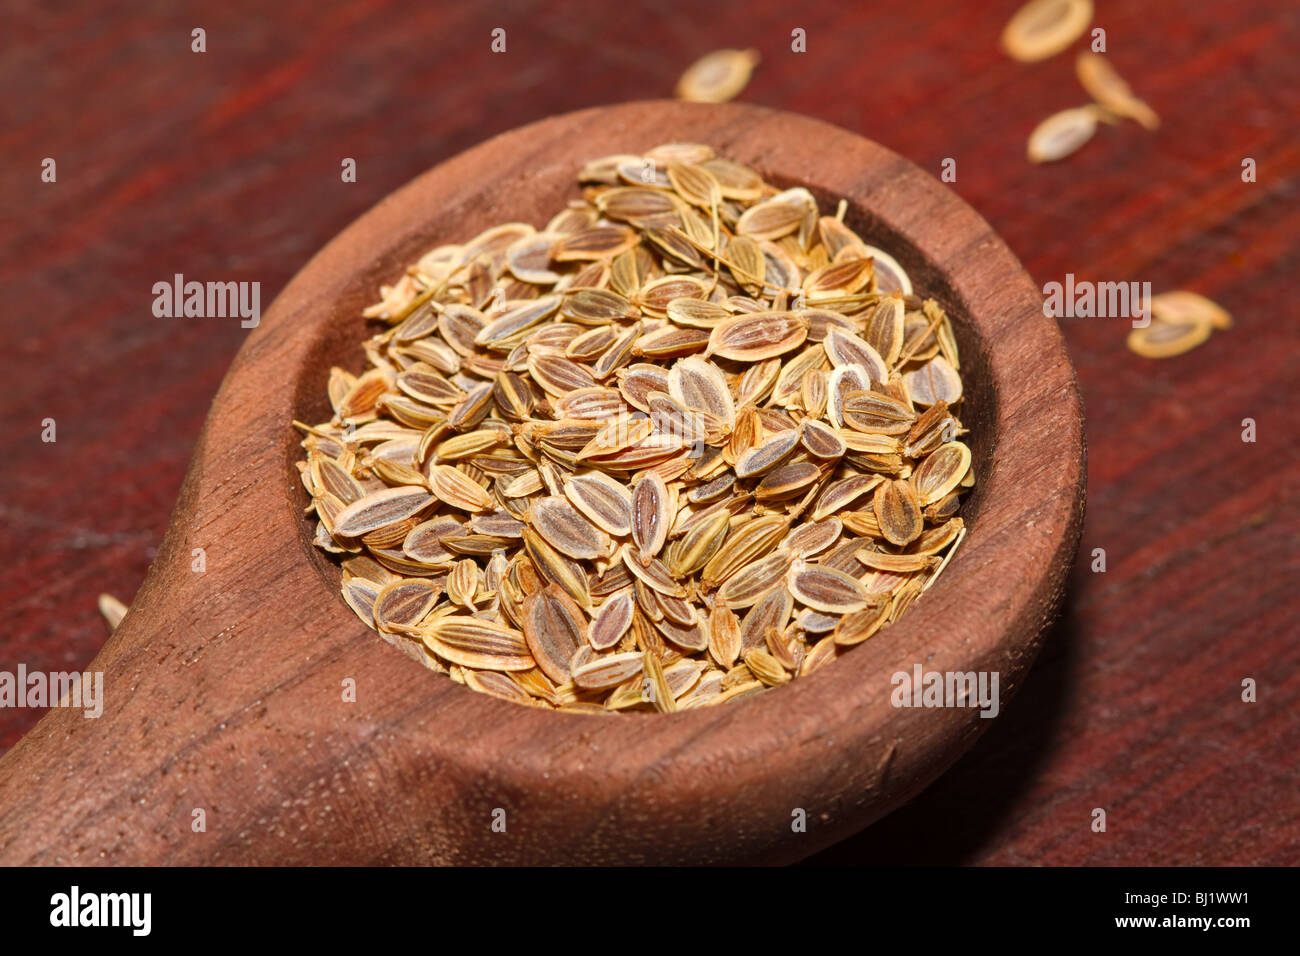 Dill seeds Stock Photo